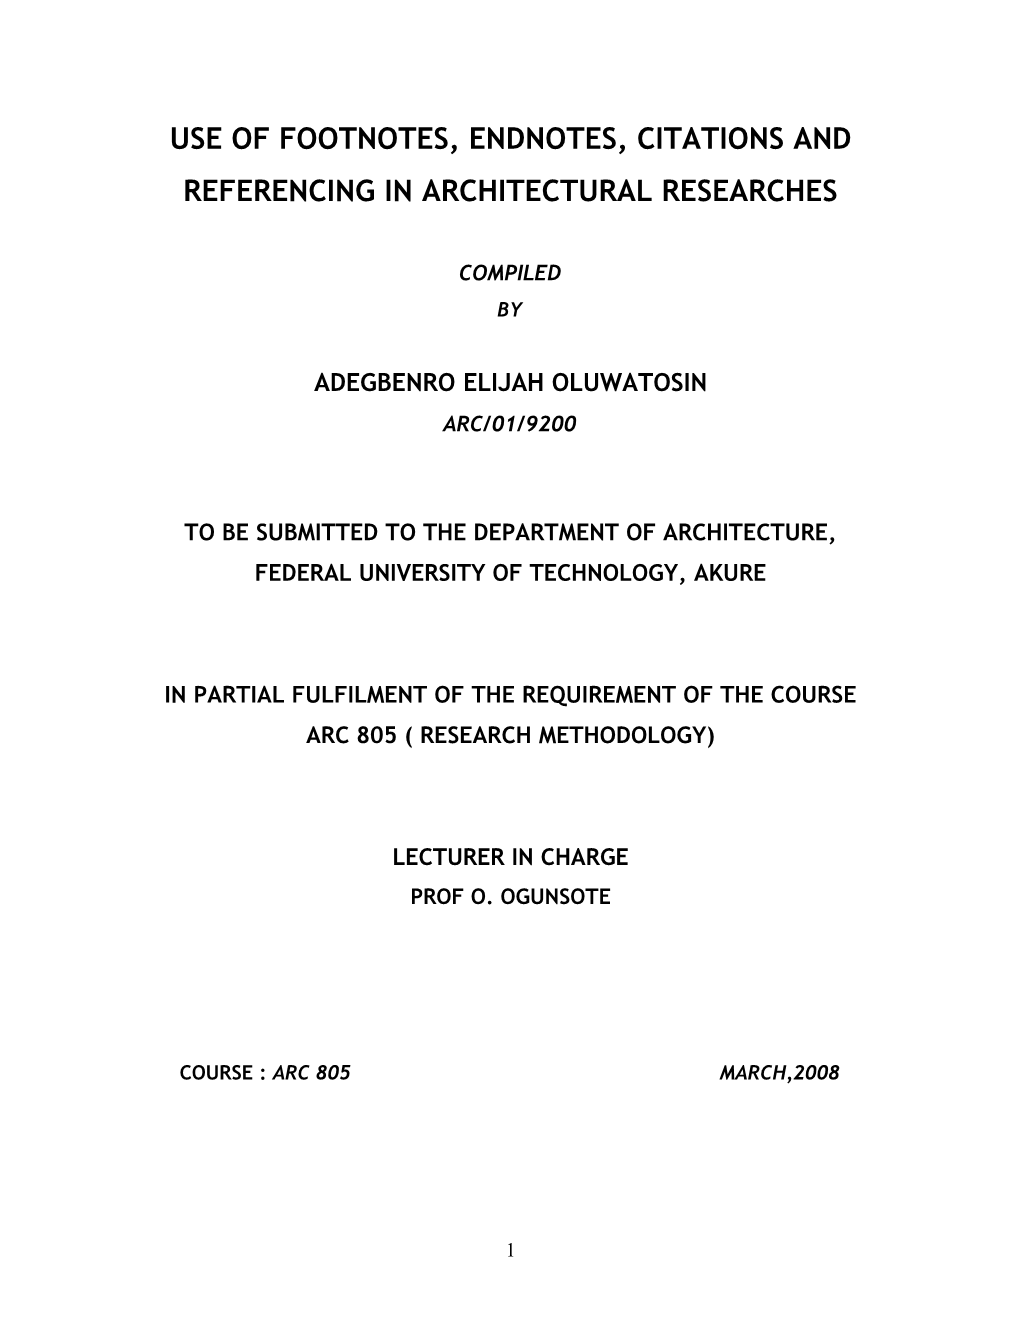 Use of Footnotes, Endnotes, Citations and Referencing in Architectural Researches